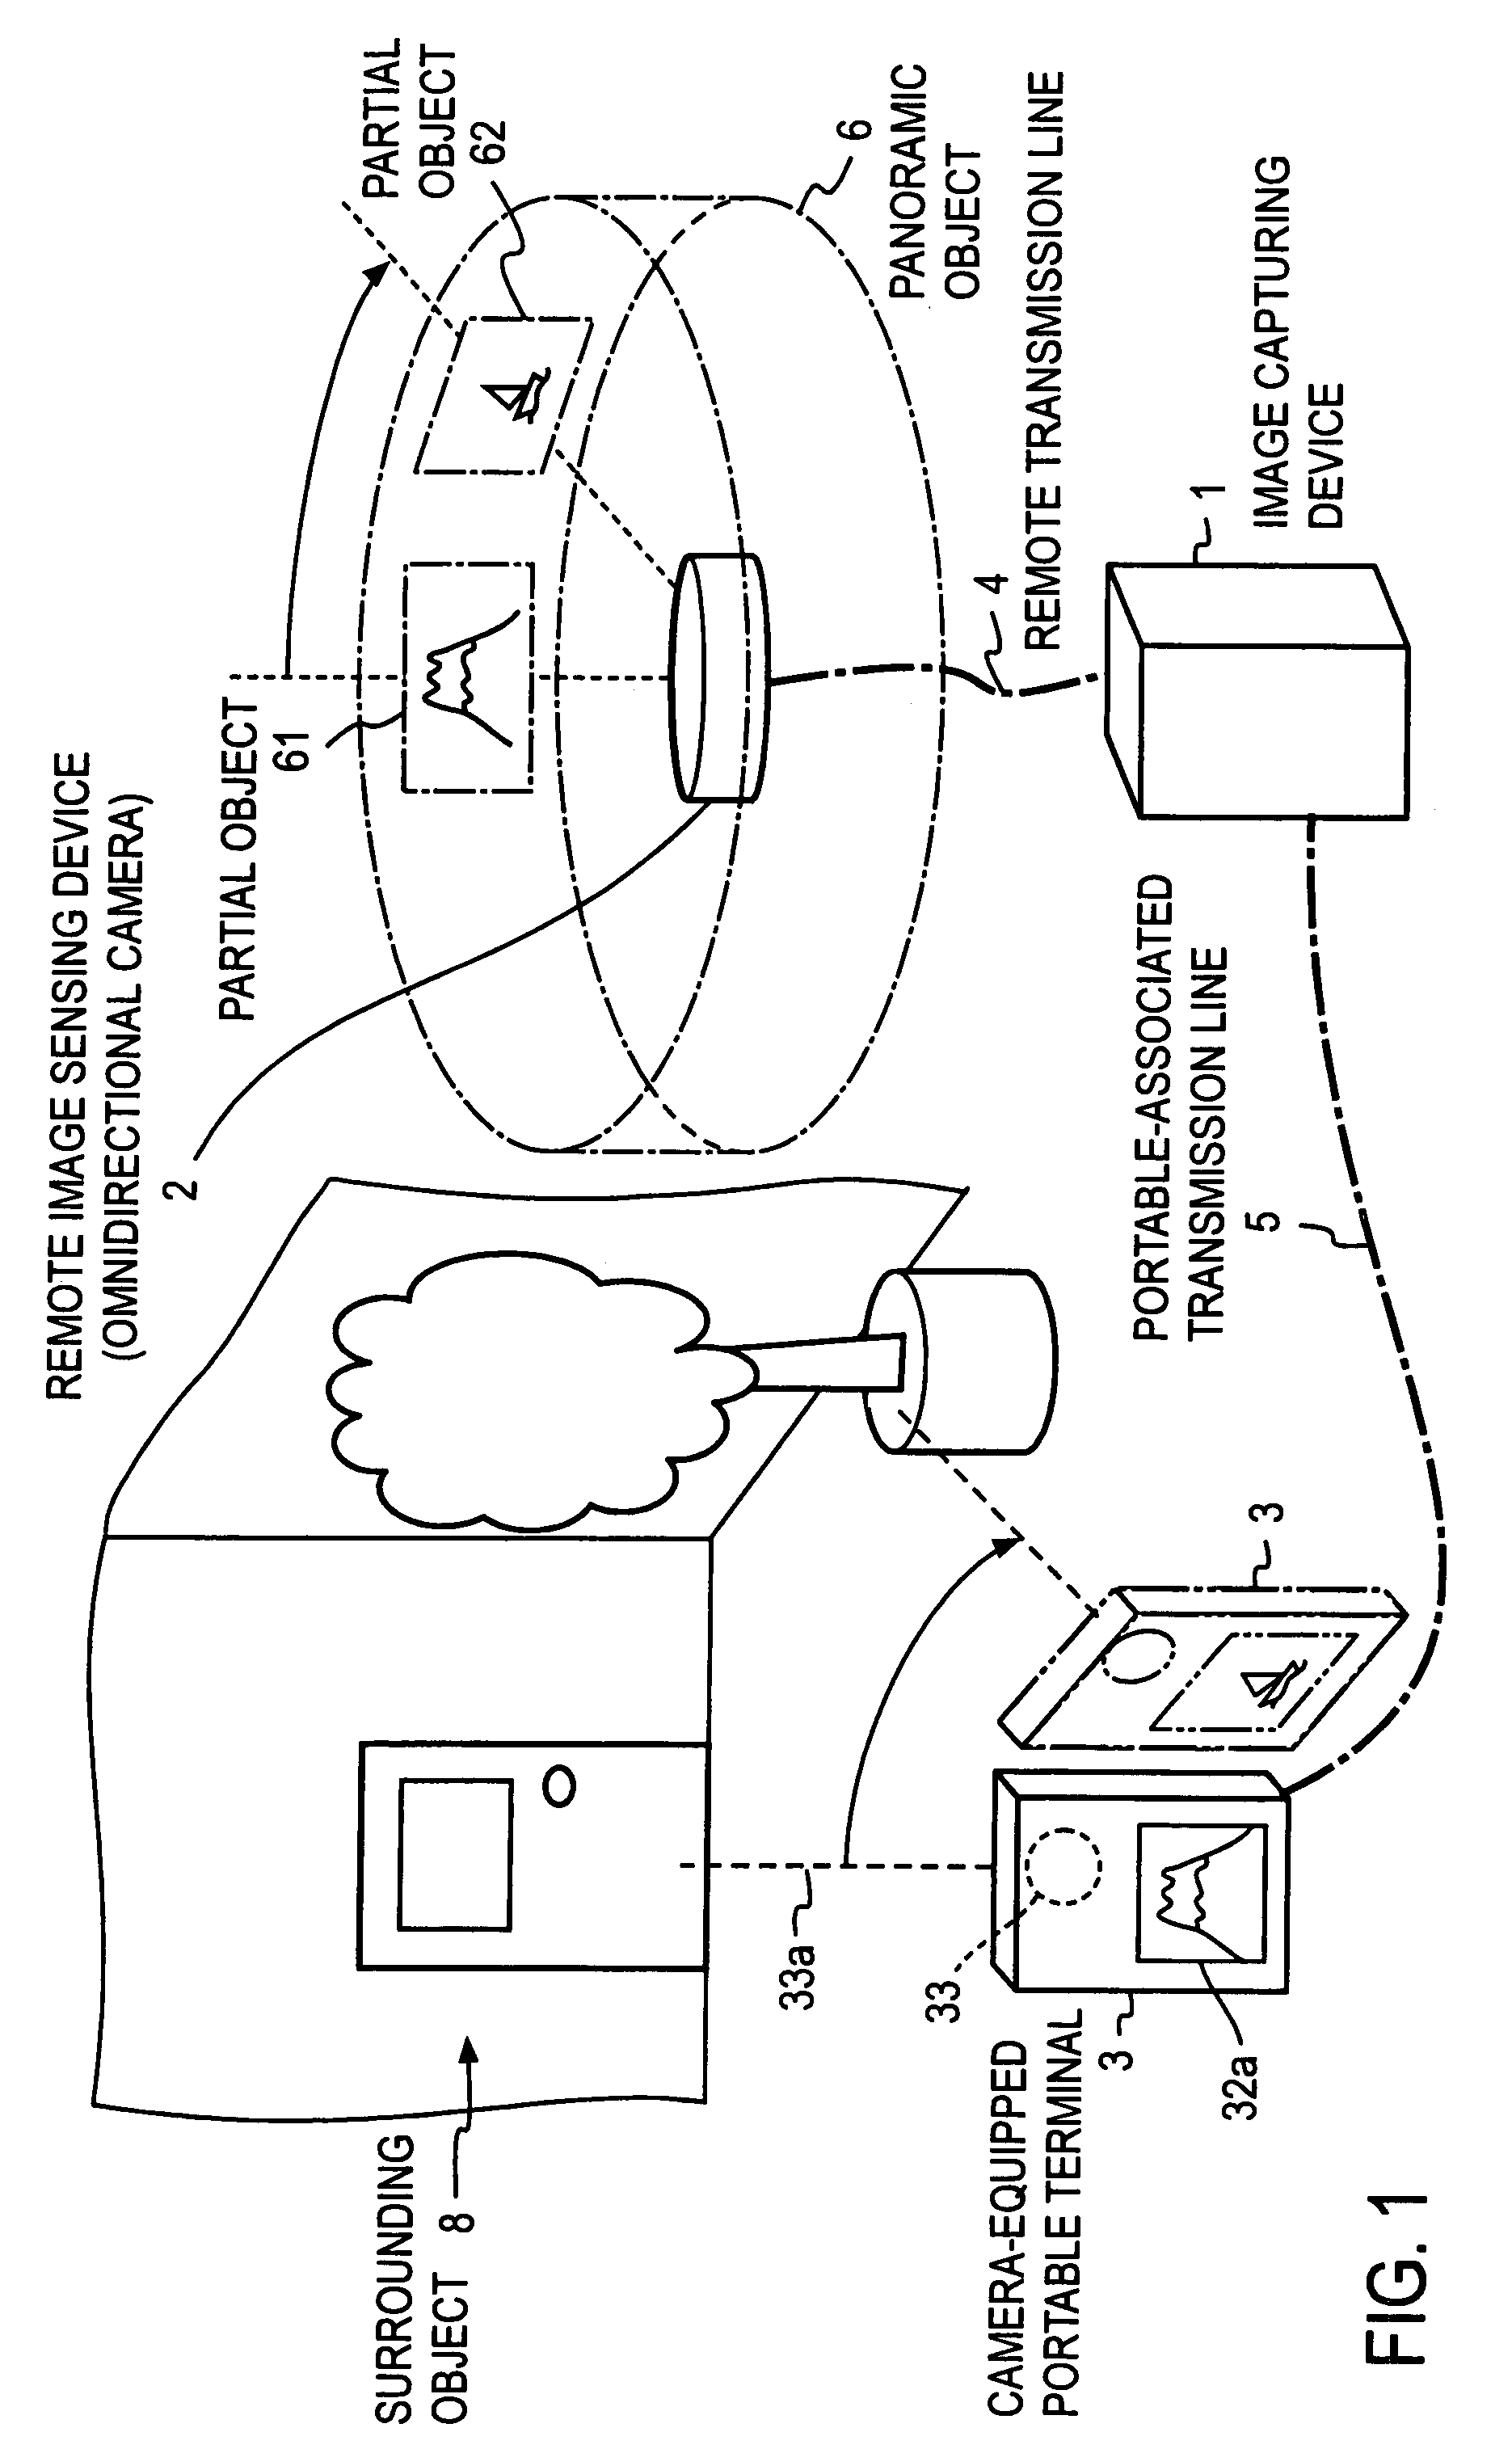 Remote image display method, image capturing device, and method and program therefor